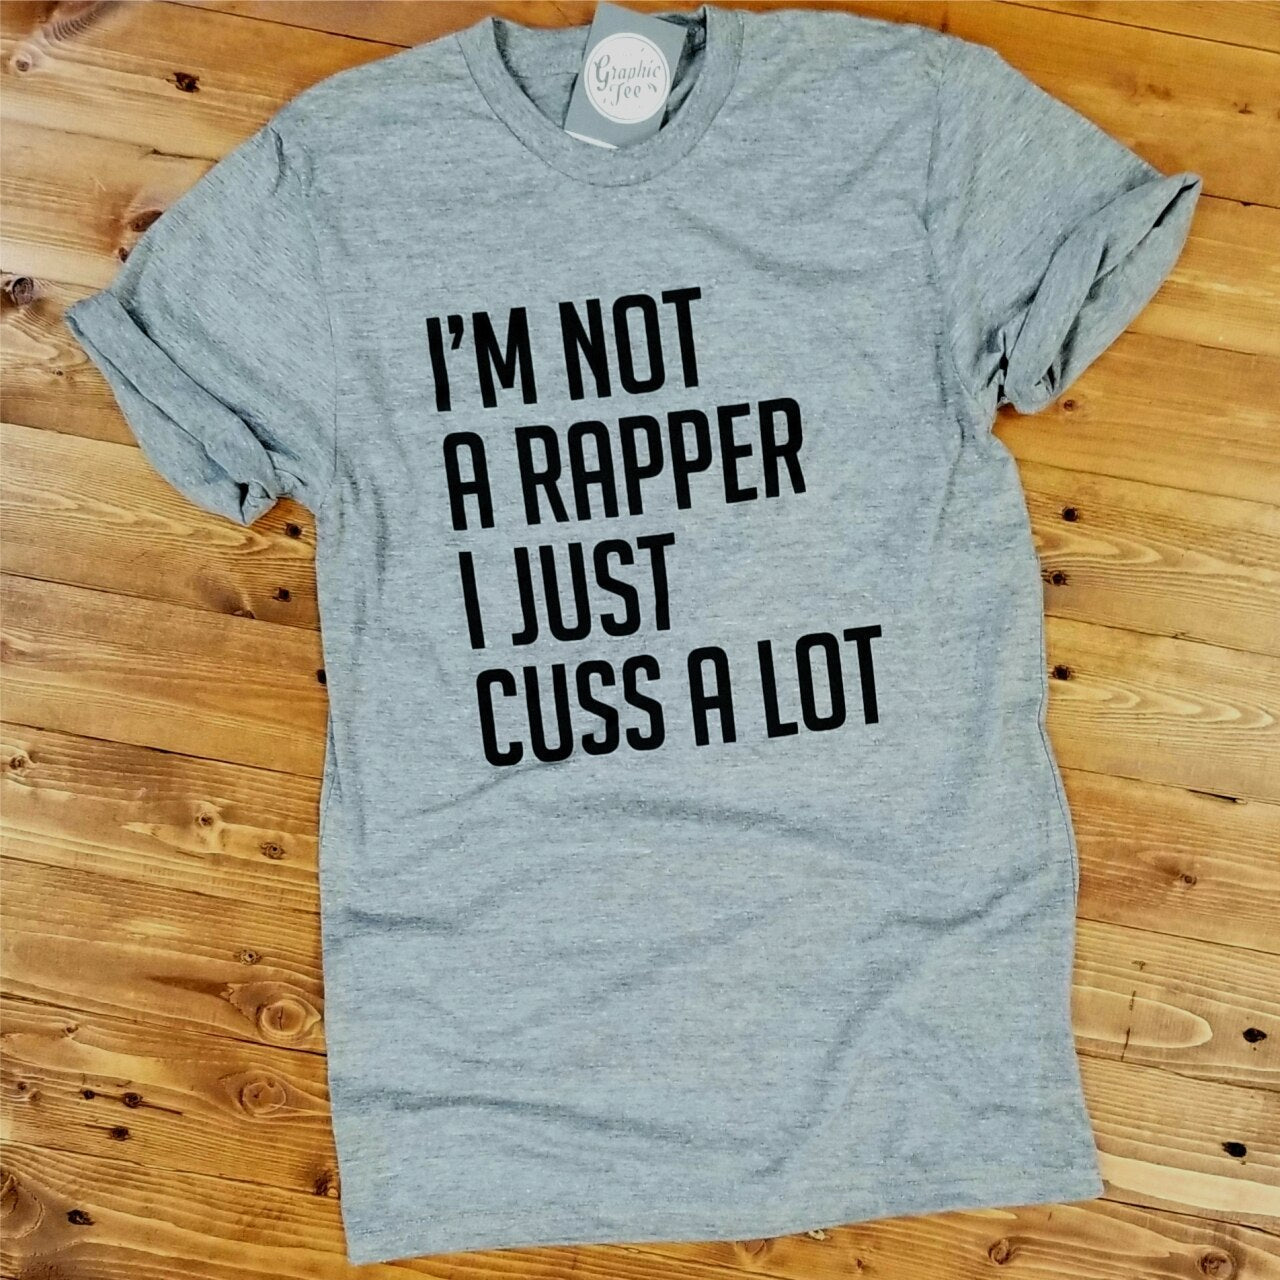 I'm Not A Rapper, I Just Cuss A Lot - Grey Unisex Tee - The Graphic Tee